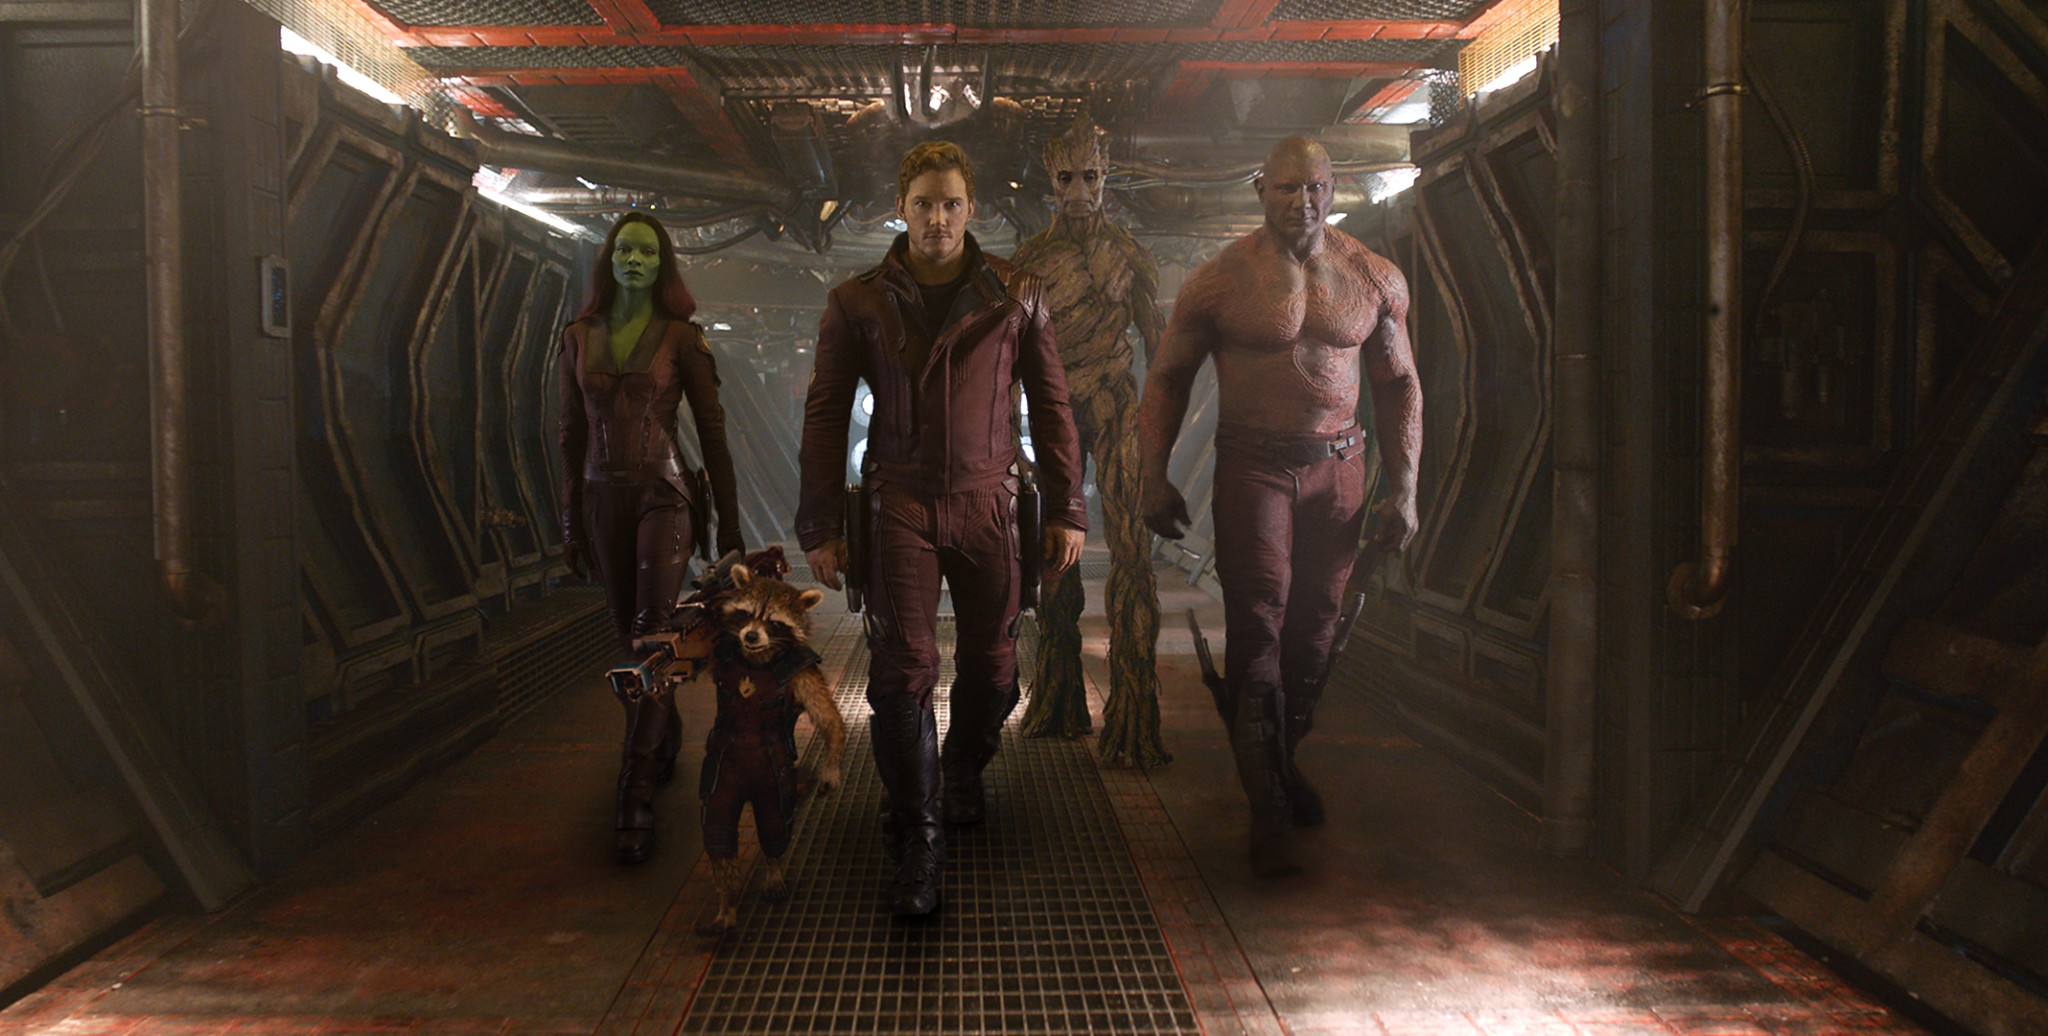 ‘Guardians of the Galaxy’ Trailer to Debut on Jimmy Kimmel Tonight